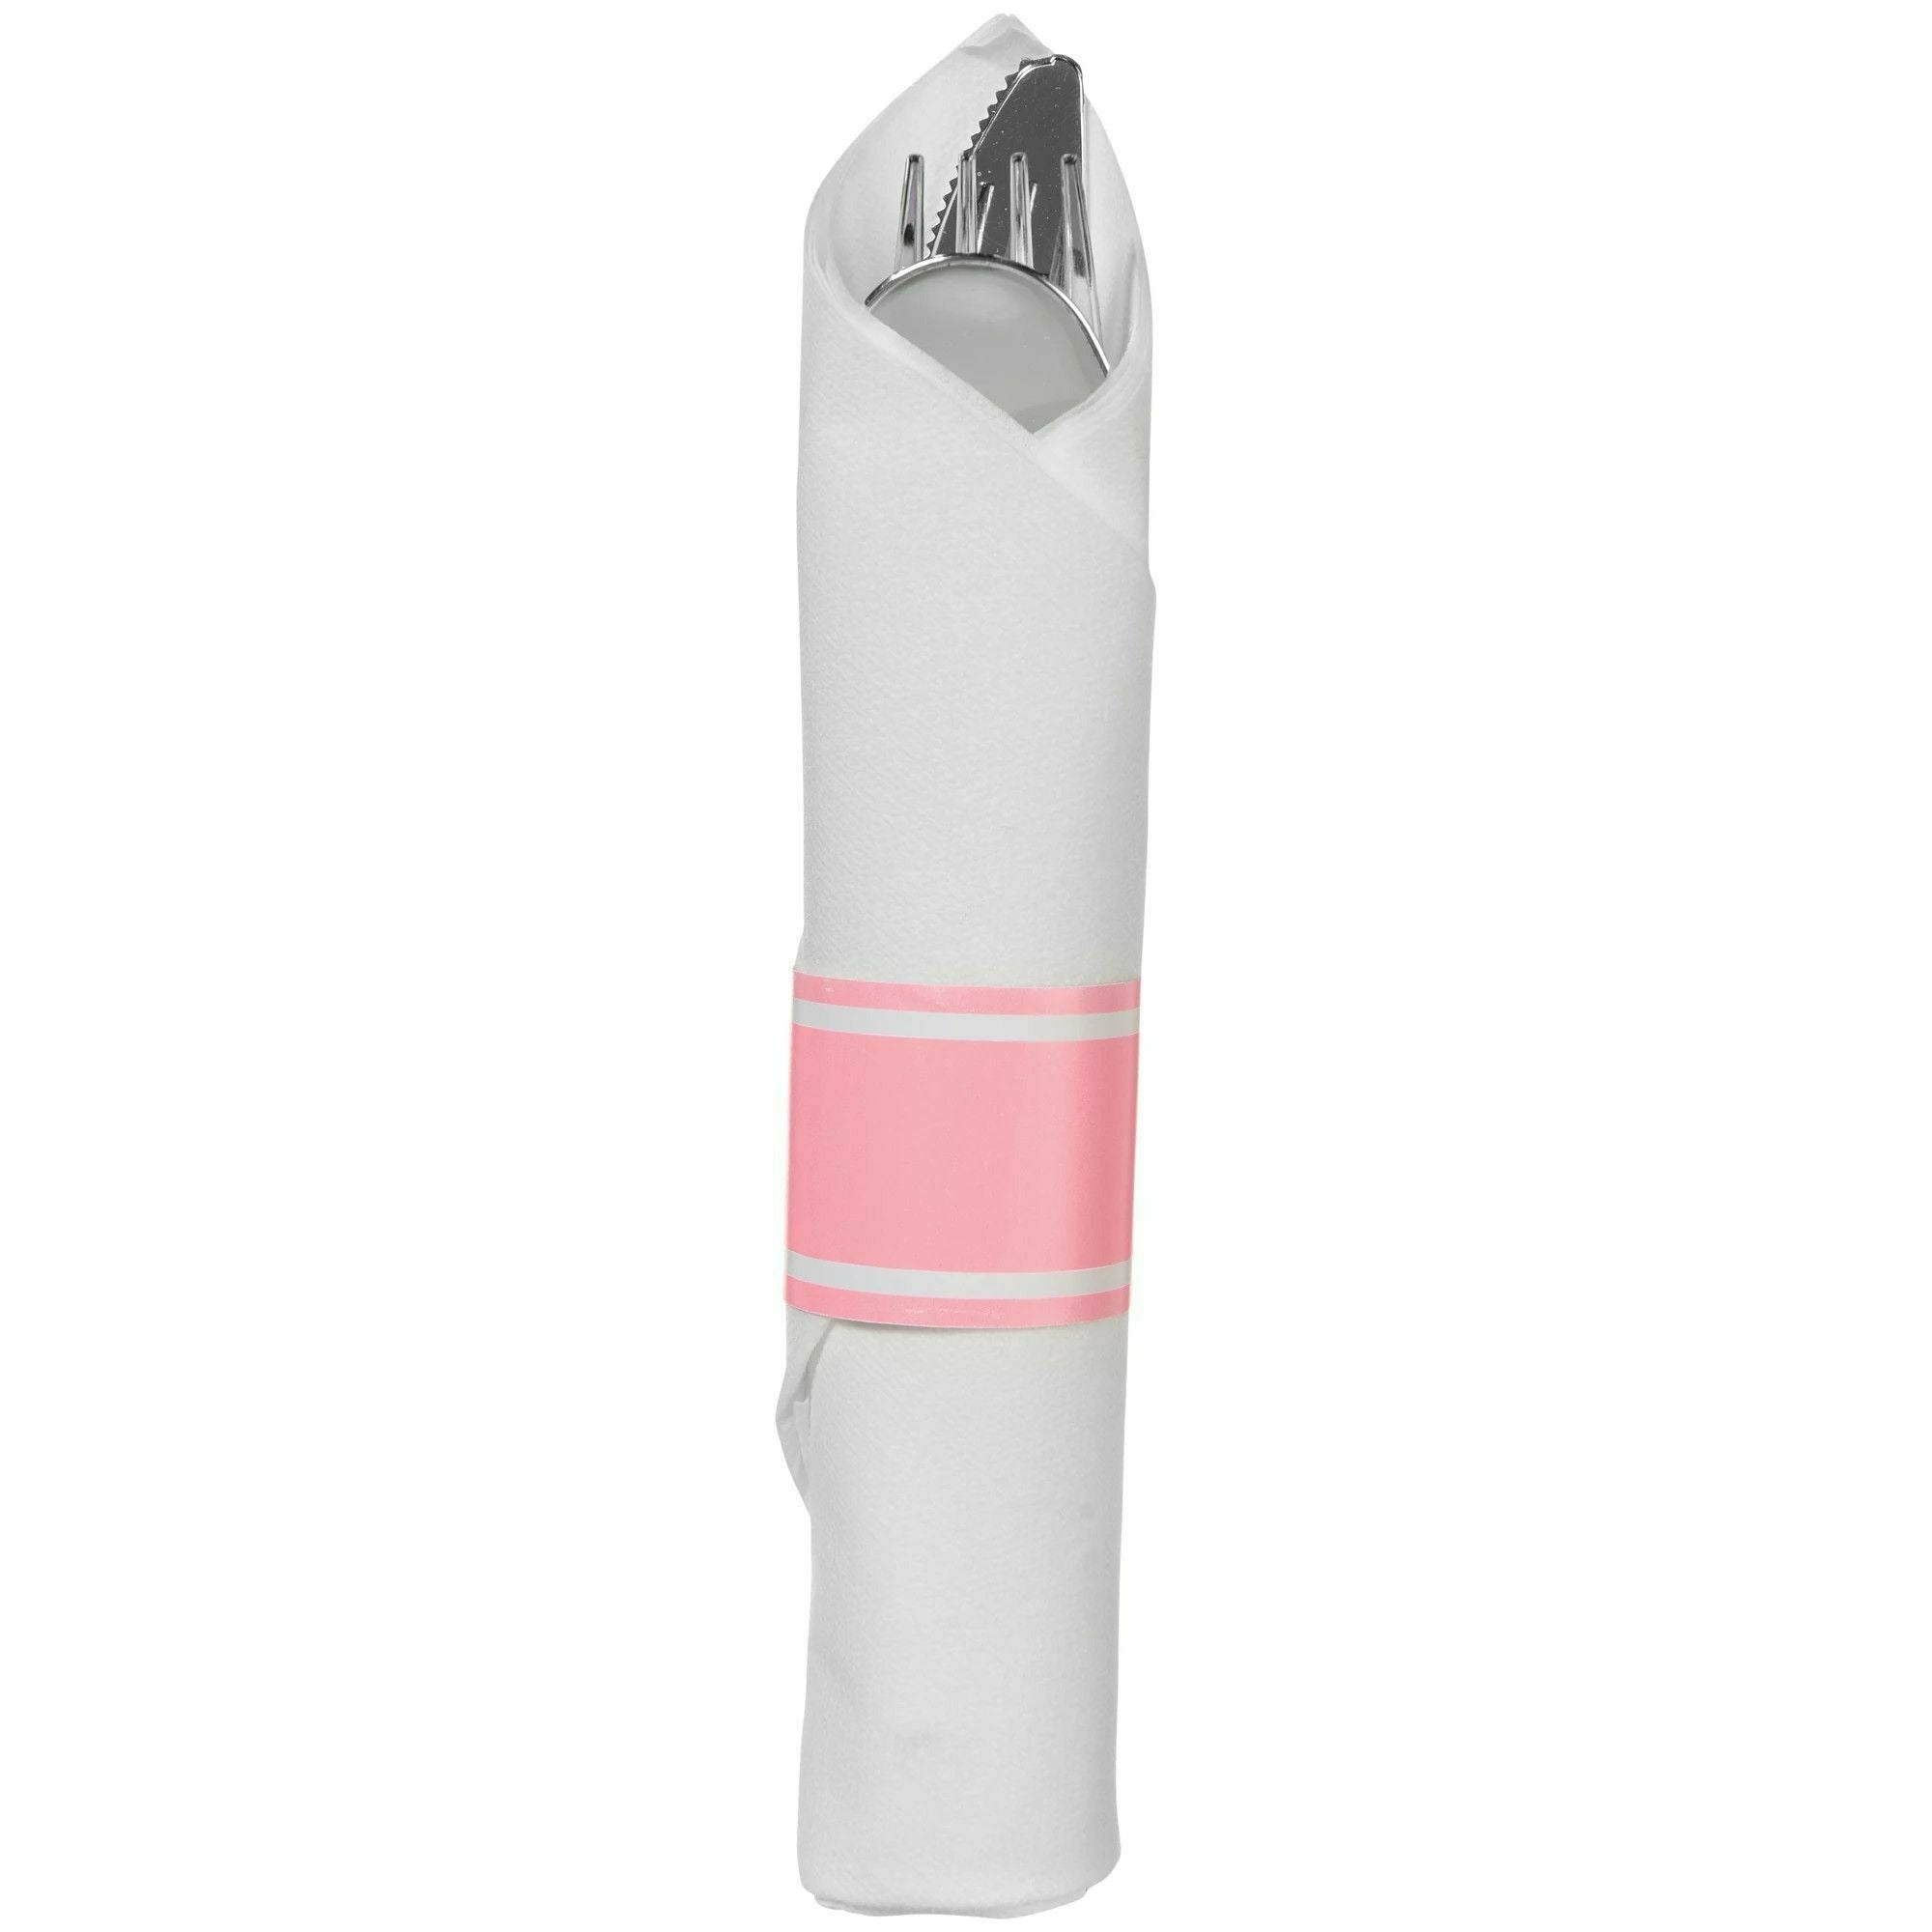 Amscan BASIC New Pink - Premium Rolled Cutlery